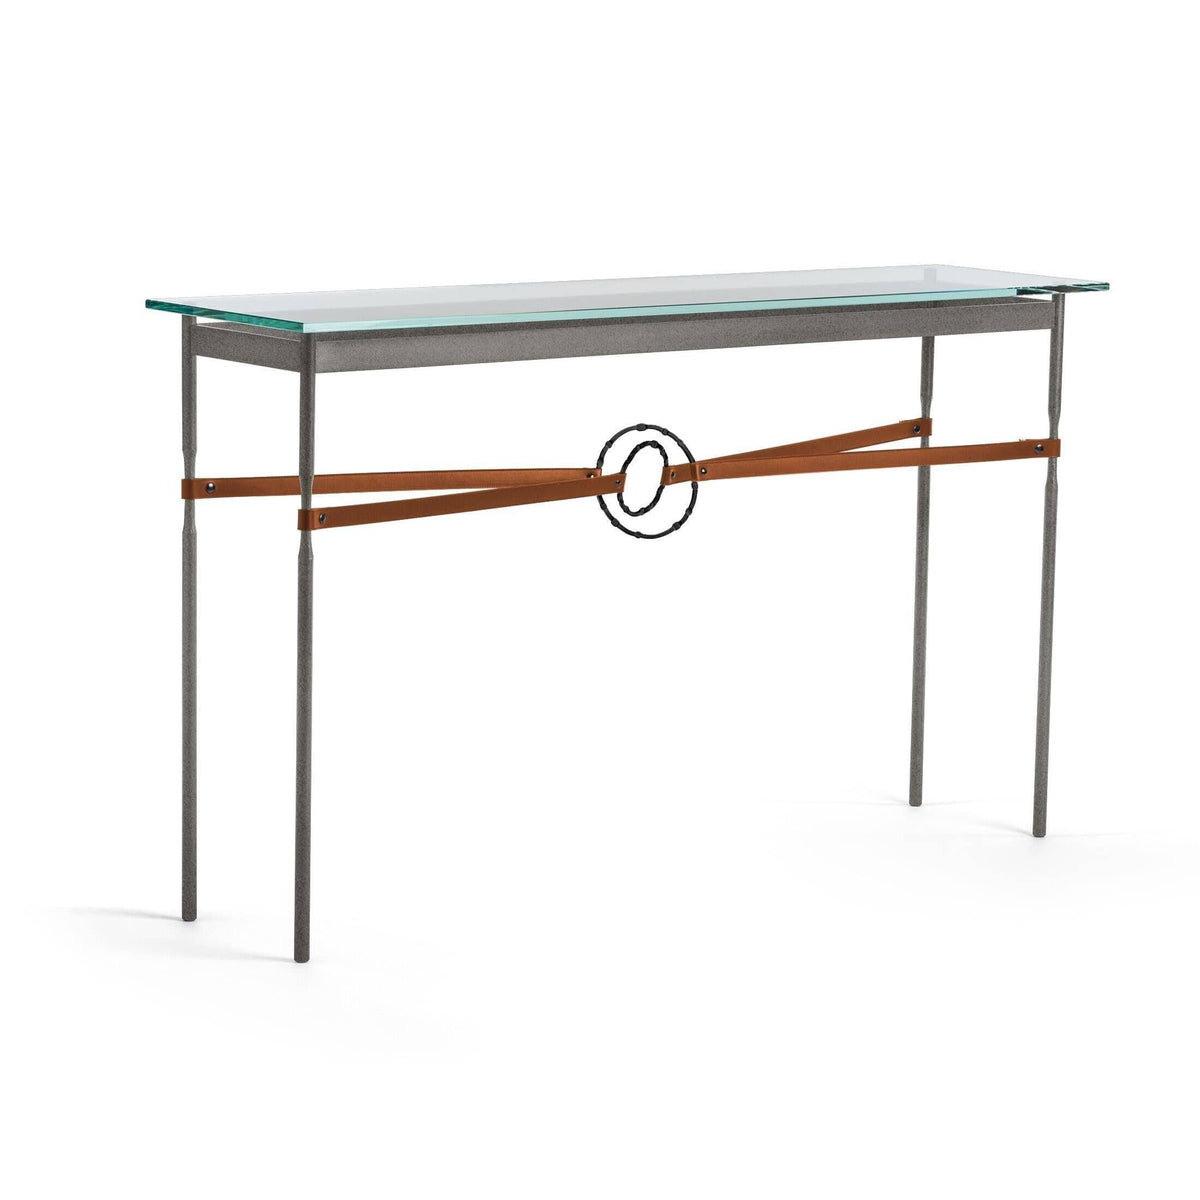 Hubbardton Forge - Equus Chestnut Leather Console Table - 750118-20-10-LC-VA0714 | Montreal Lighting & Hardware